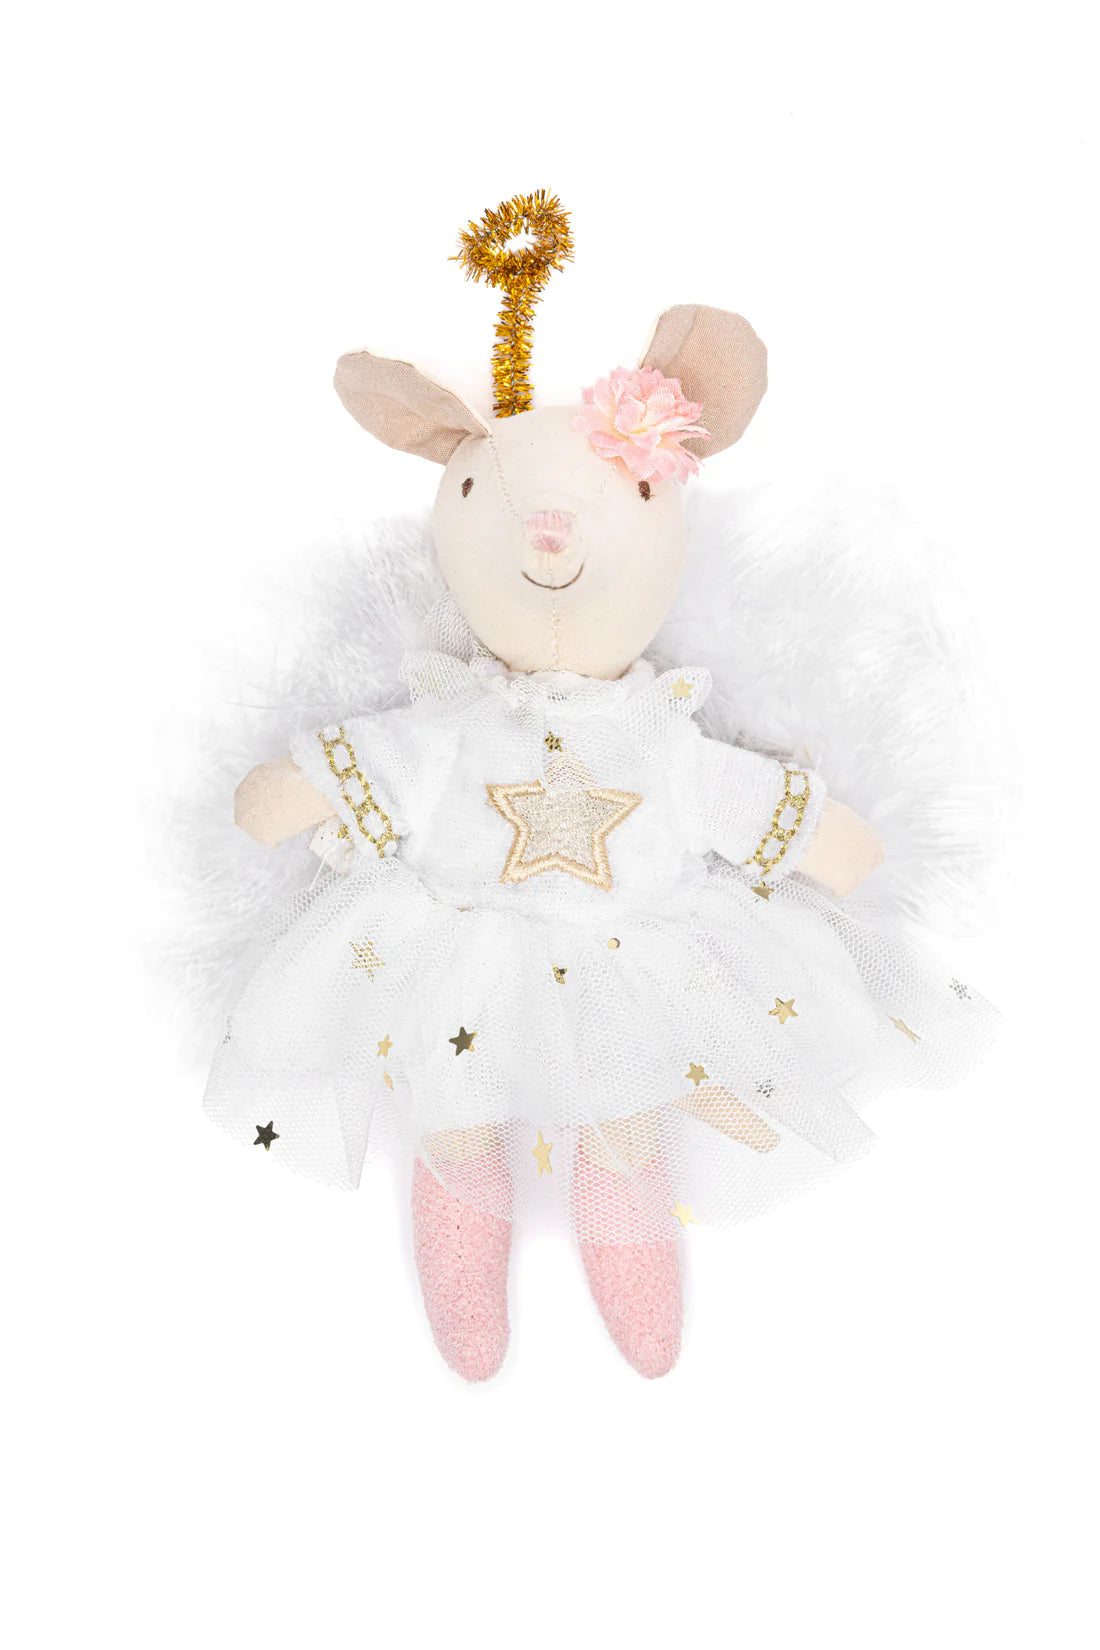 Evangeline the Angel Mouse